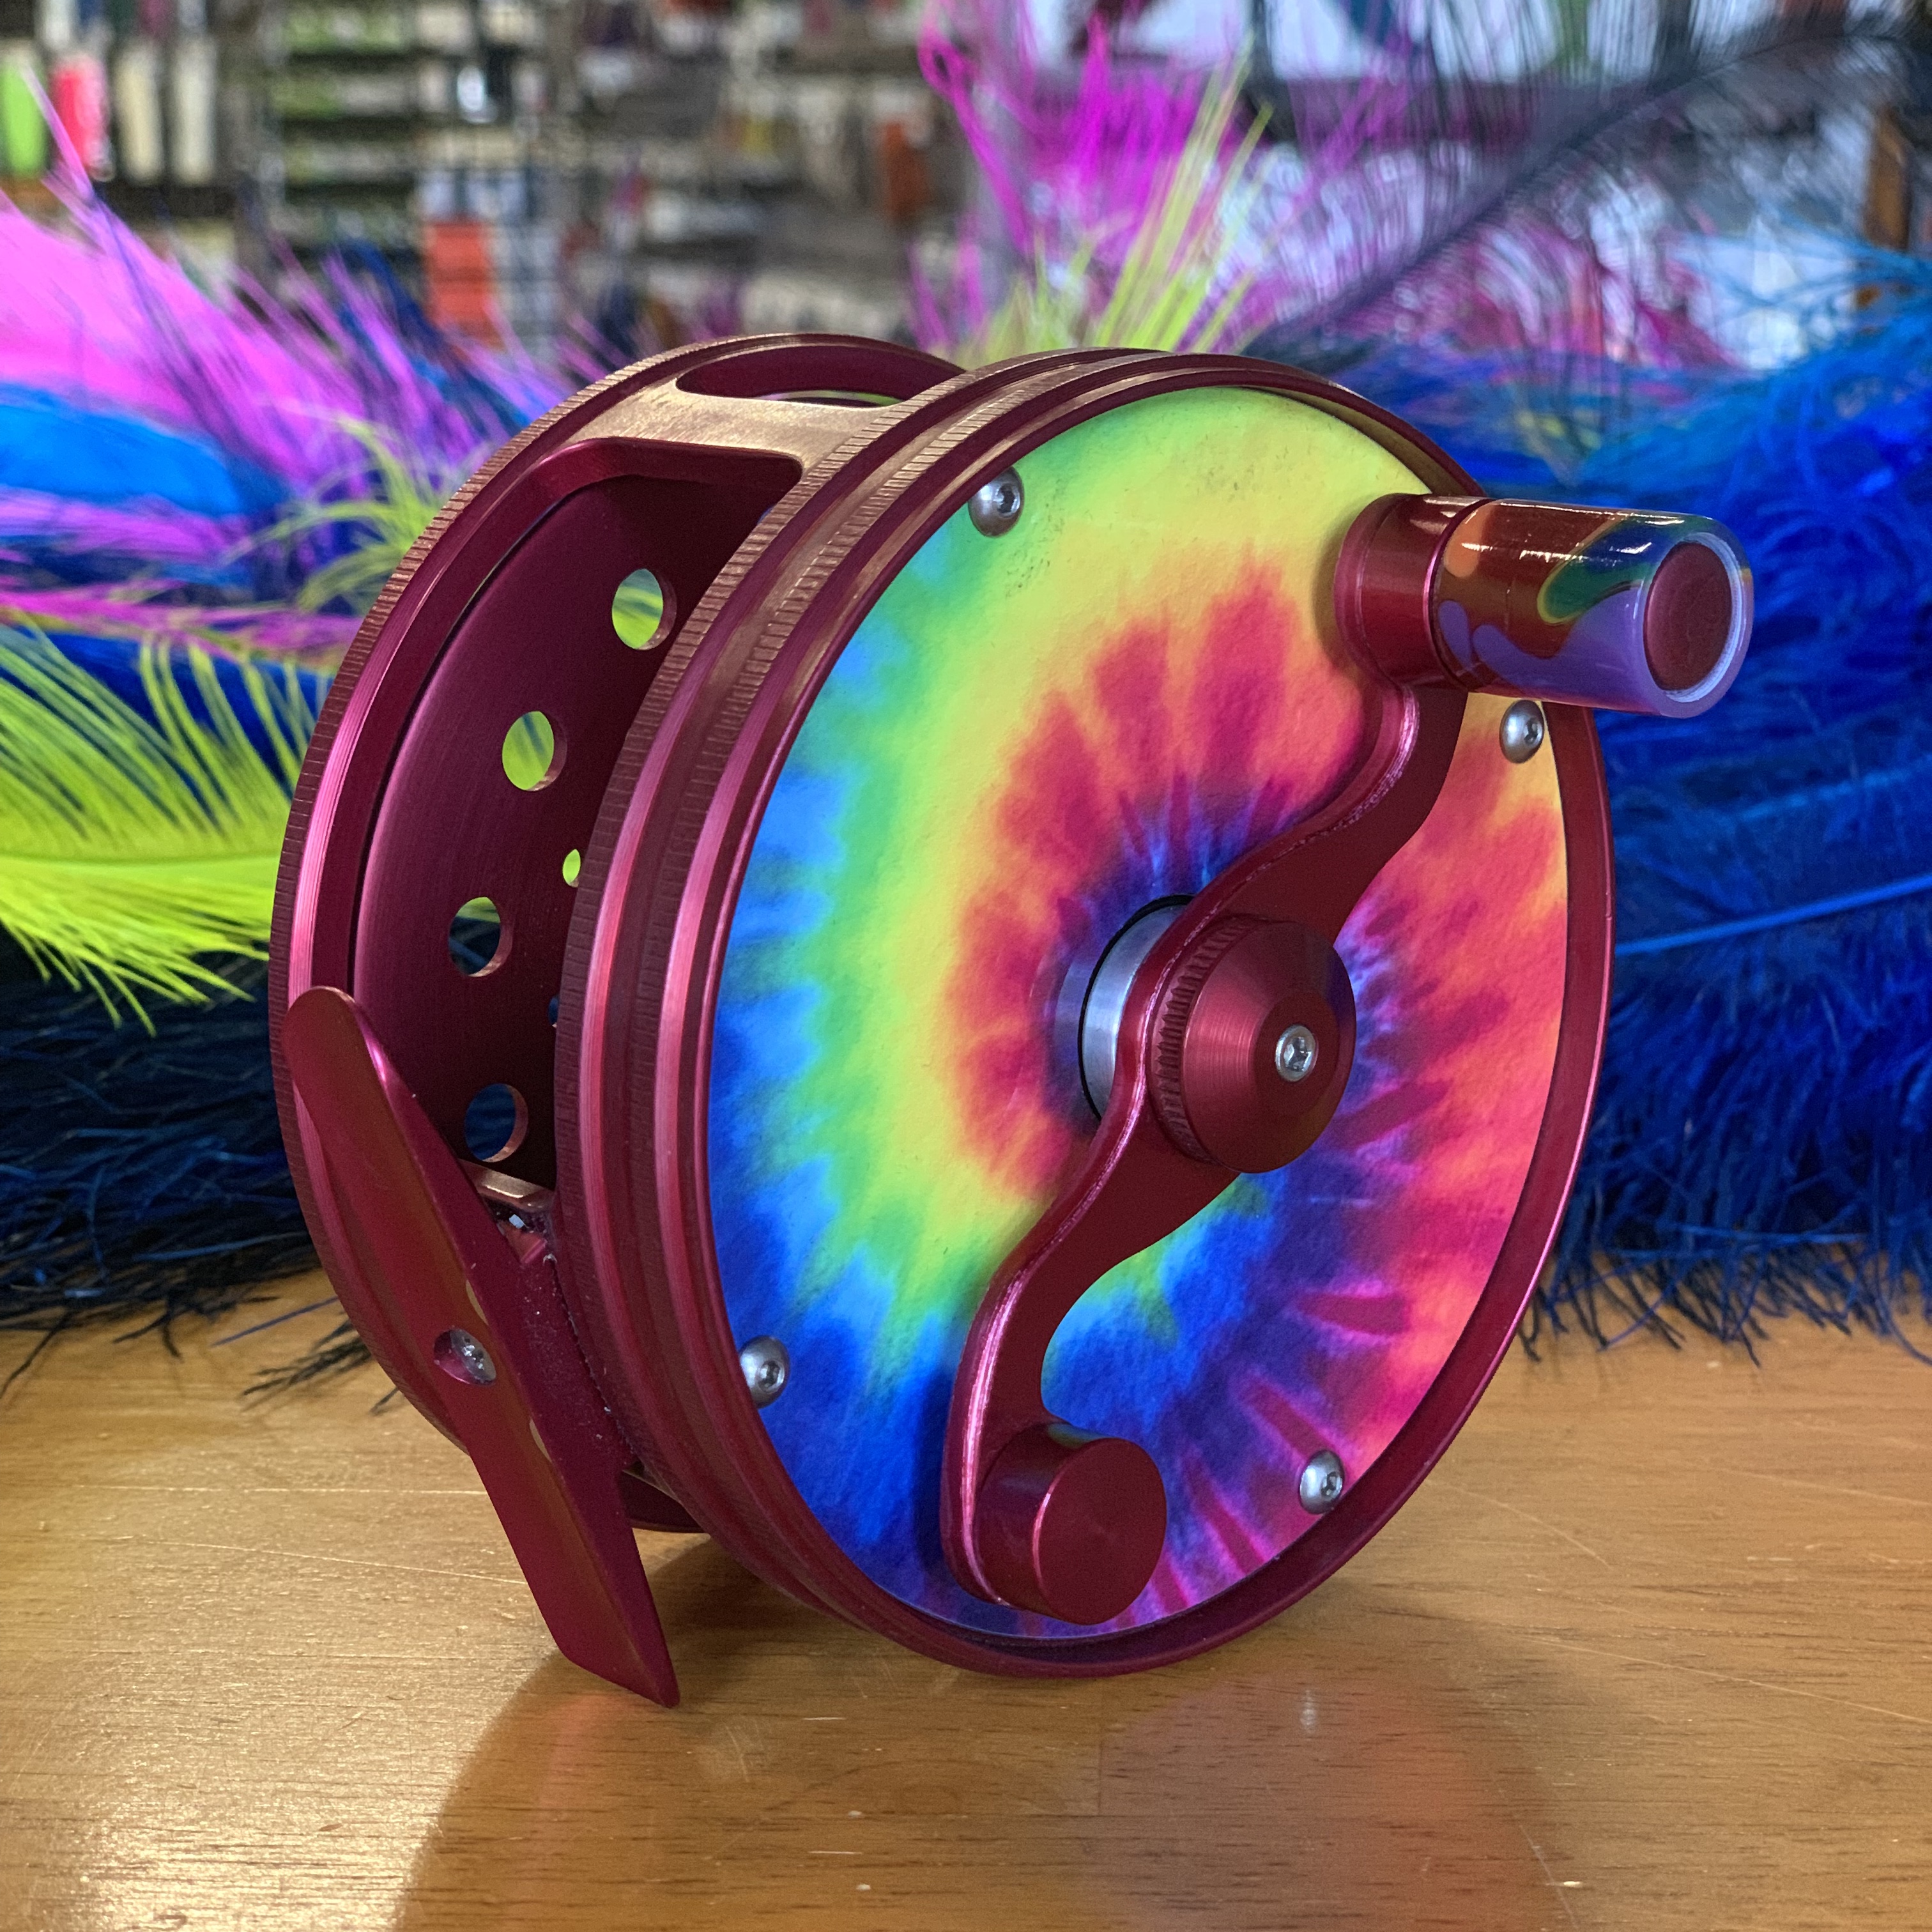 Speyco 4" Skagit Reel - Red Frame with Tie-Dye Face